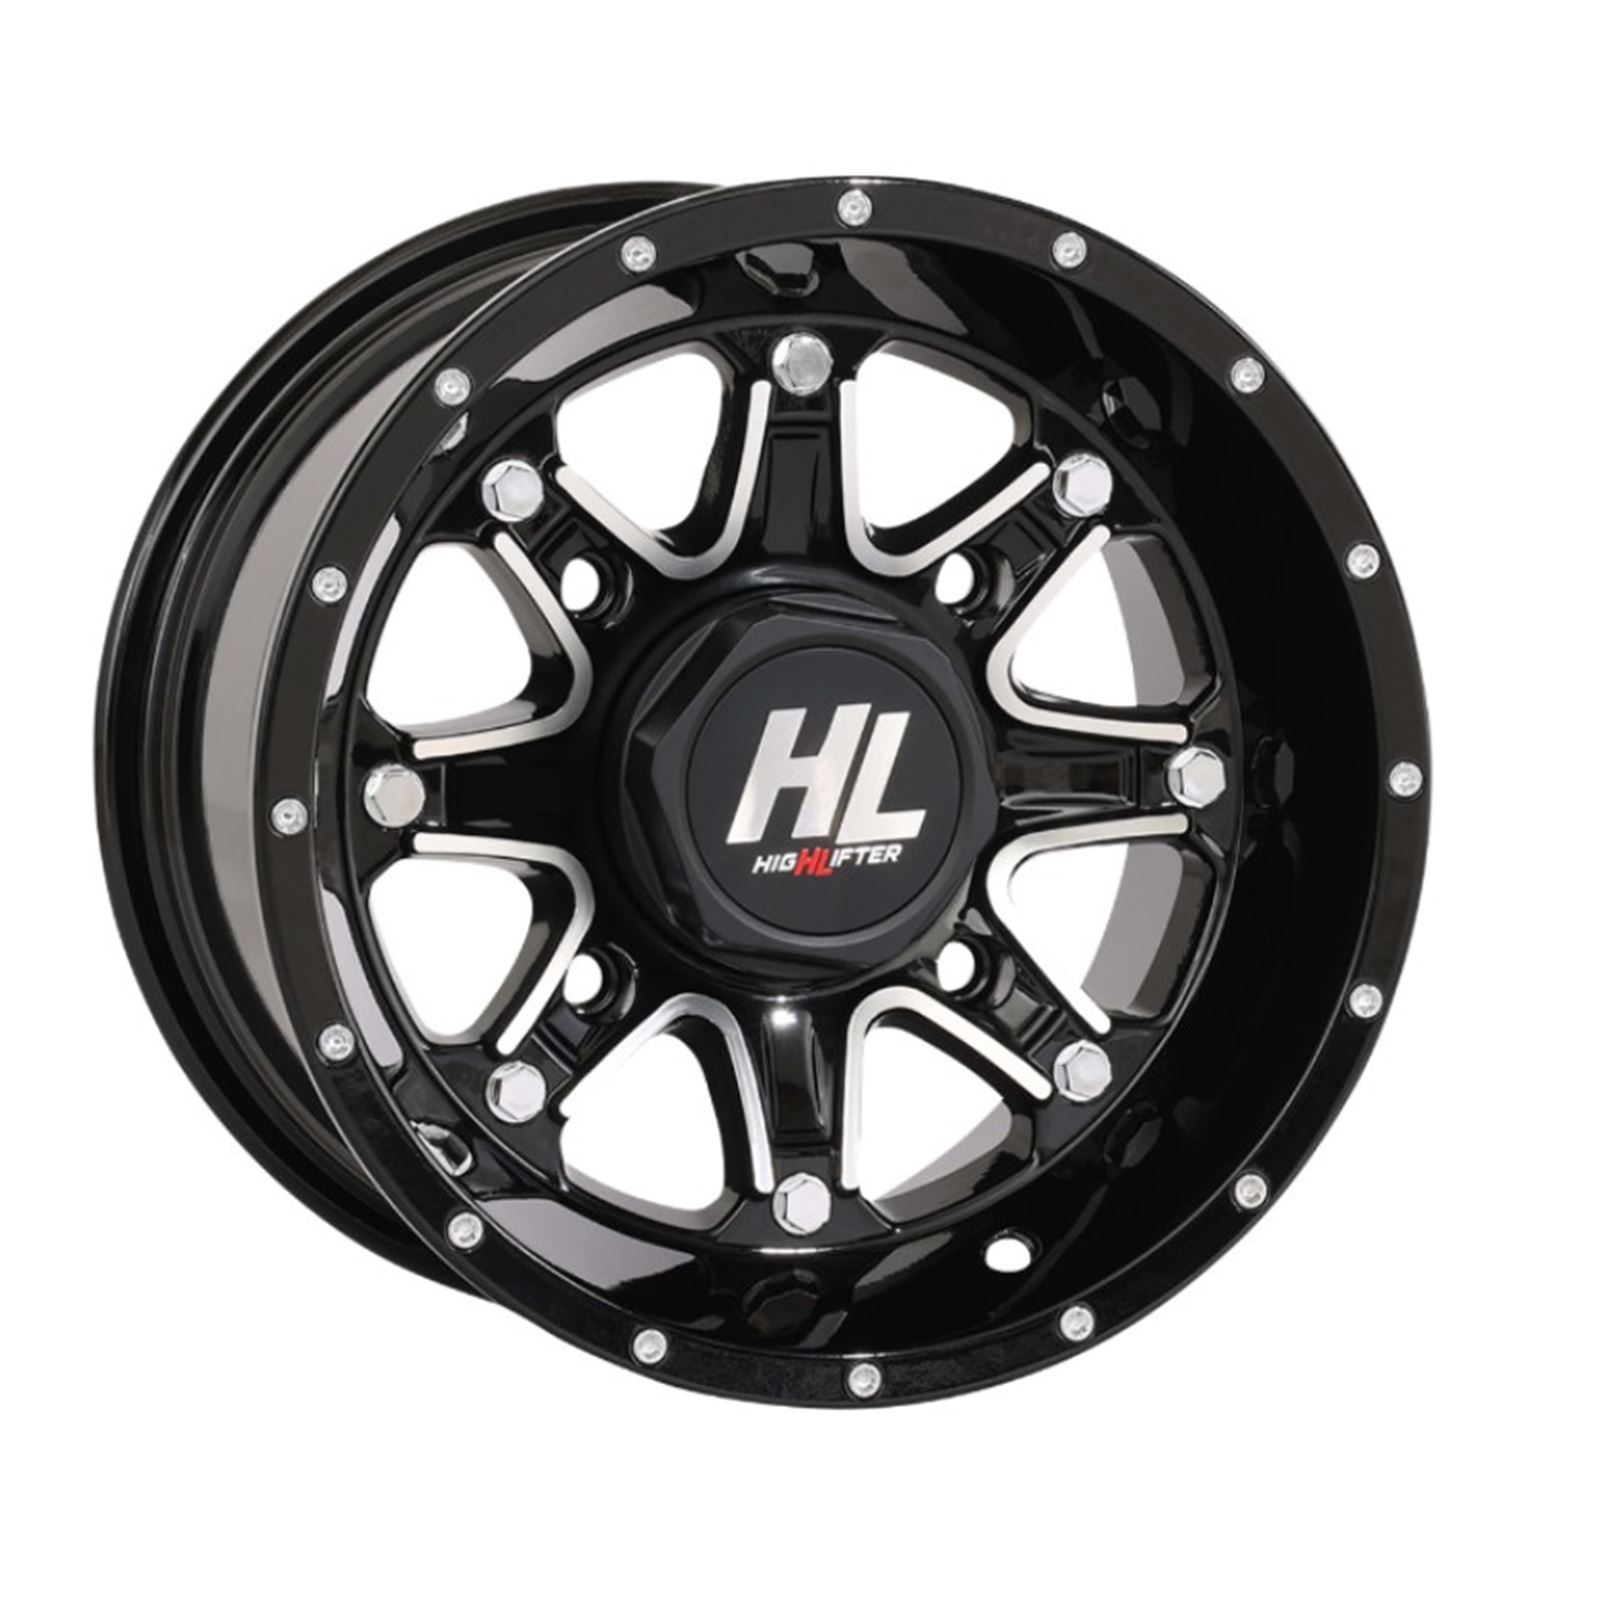 High Lifter Wheel - HL4 - Front/Rear - Gloss Black with Machined - 12x7 - 4/110